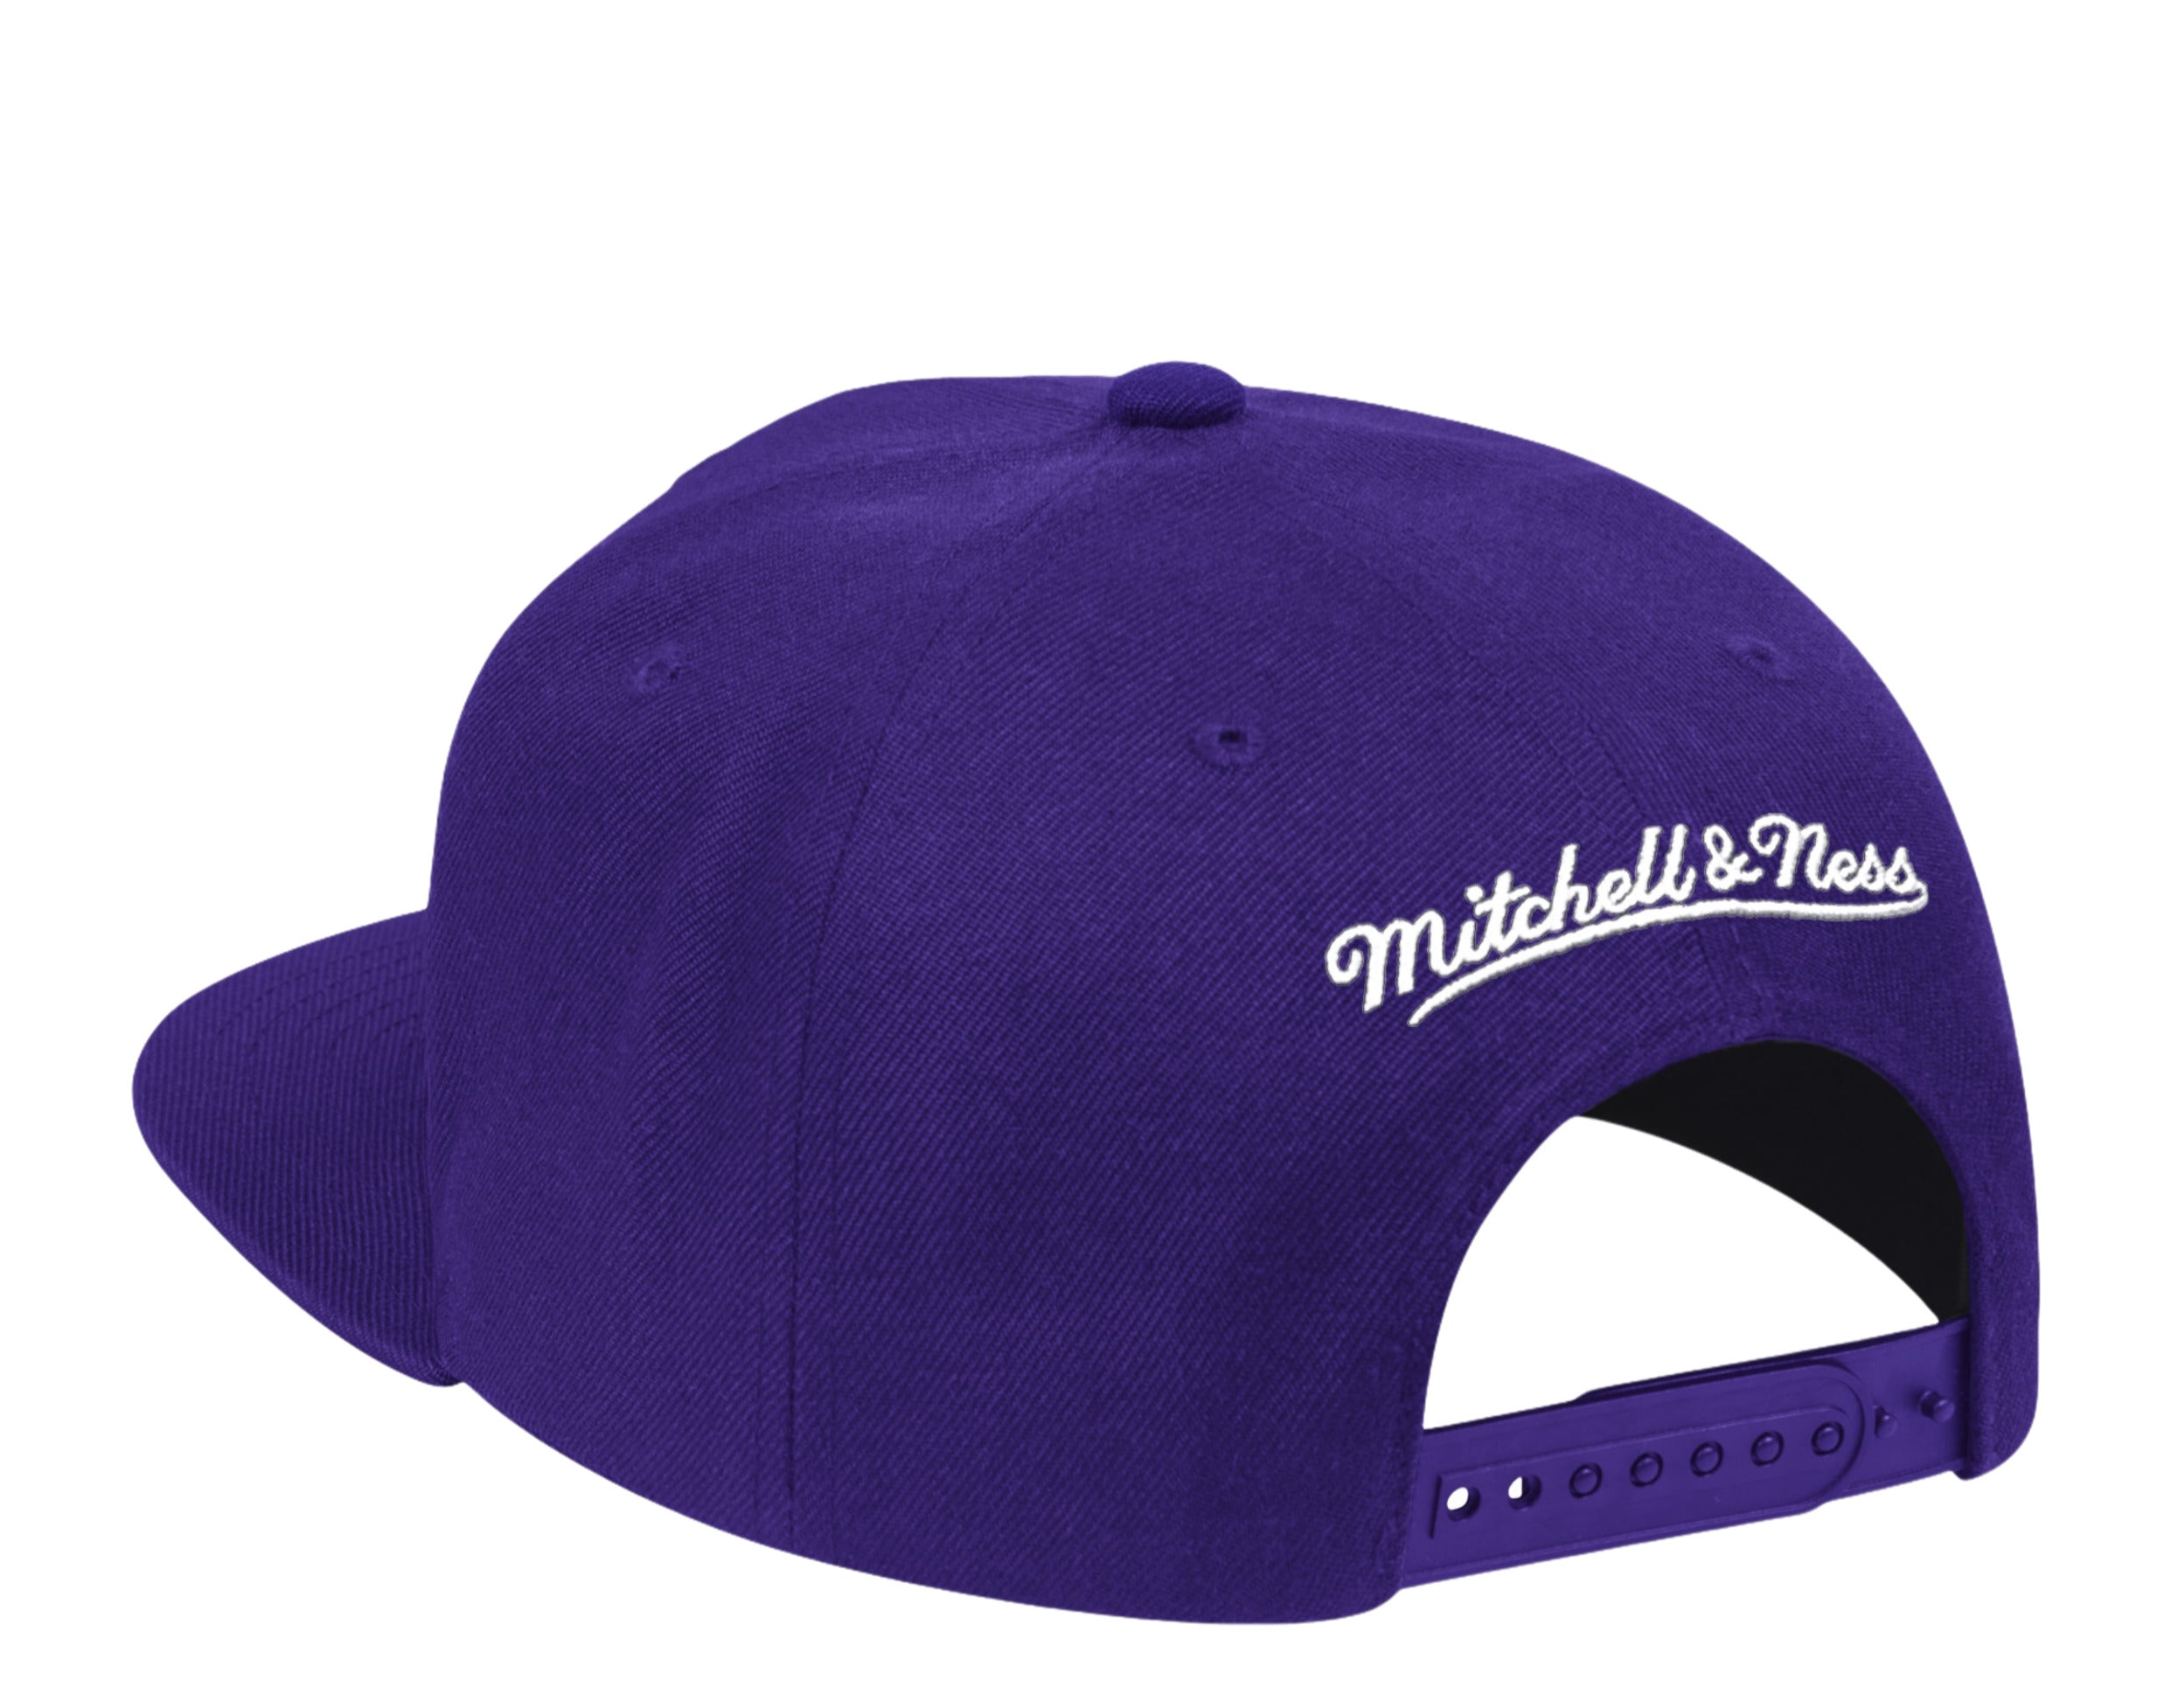 NBA Phoenix Suns Mitchell & Ness Back in Action Snapback - Just Sports  Warehouse